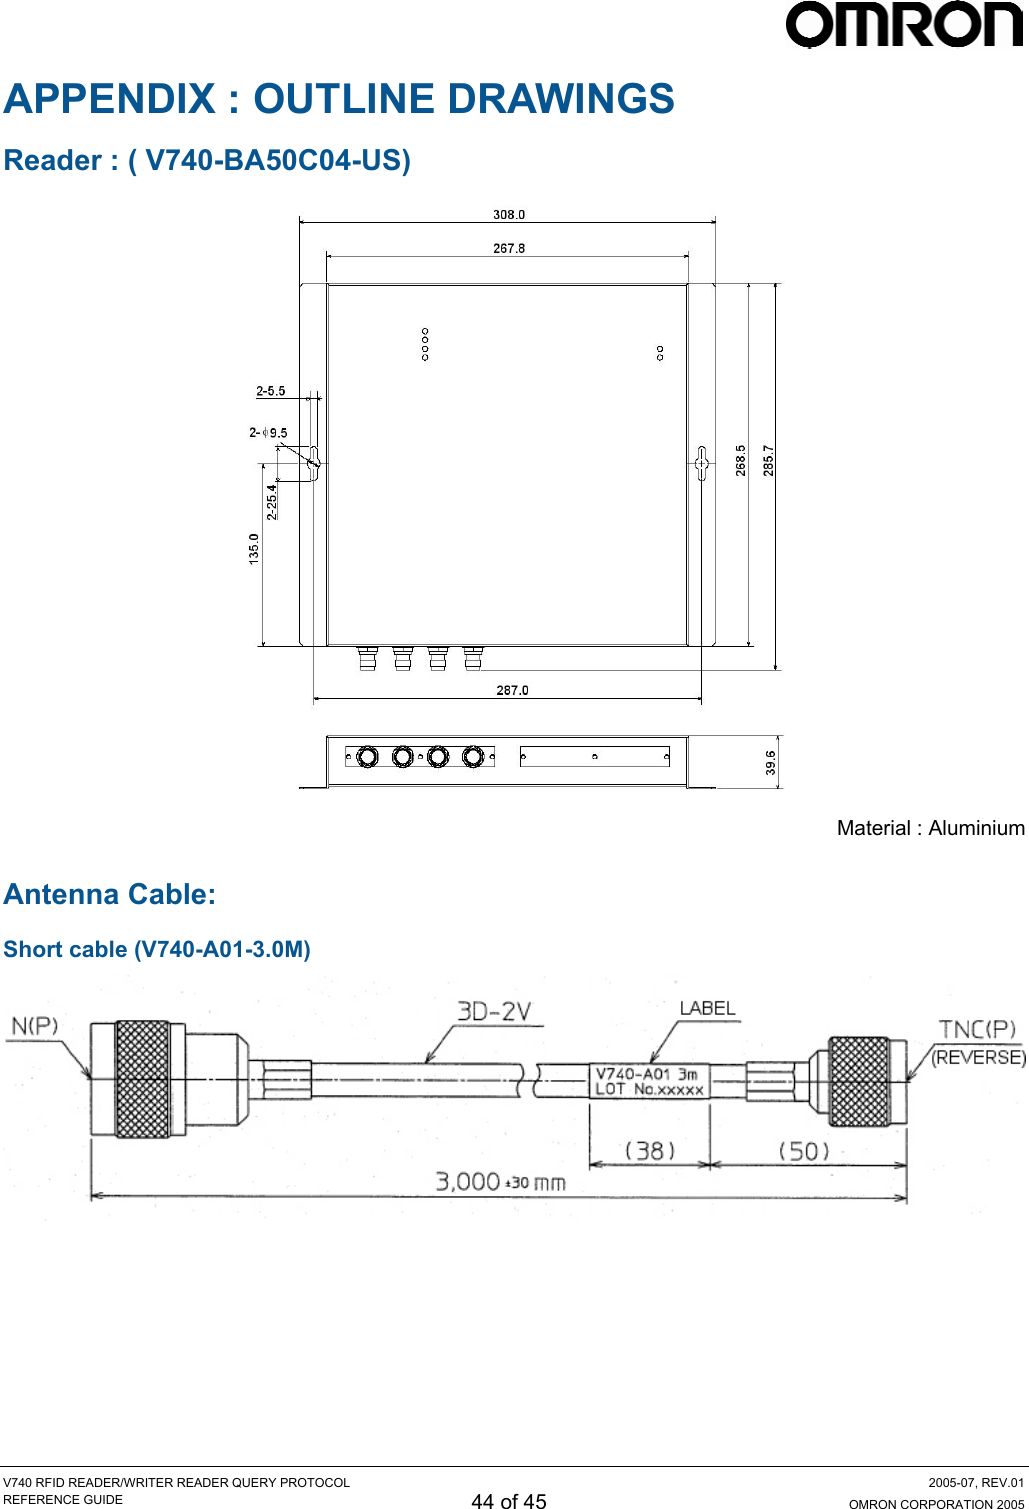     APPENDIX : OUTLINE DRAWINGS Reader : ( V740-BA50C04-US)  Material : Aluminium Antenna Cable: Short cable (V740-A01-3.0M)   V740 RFID READER/WRITER READER QUERY PROTOCOL  2005-07, REV.01 REFERENCE GUIDE 44 of 45  OMRON CORPORATION 2005 